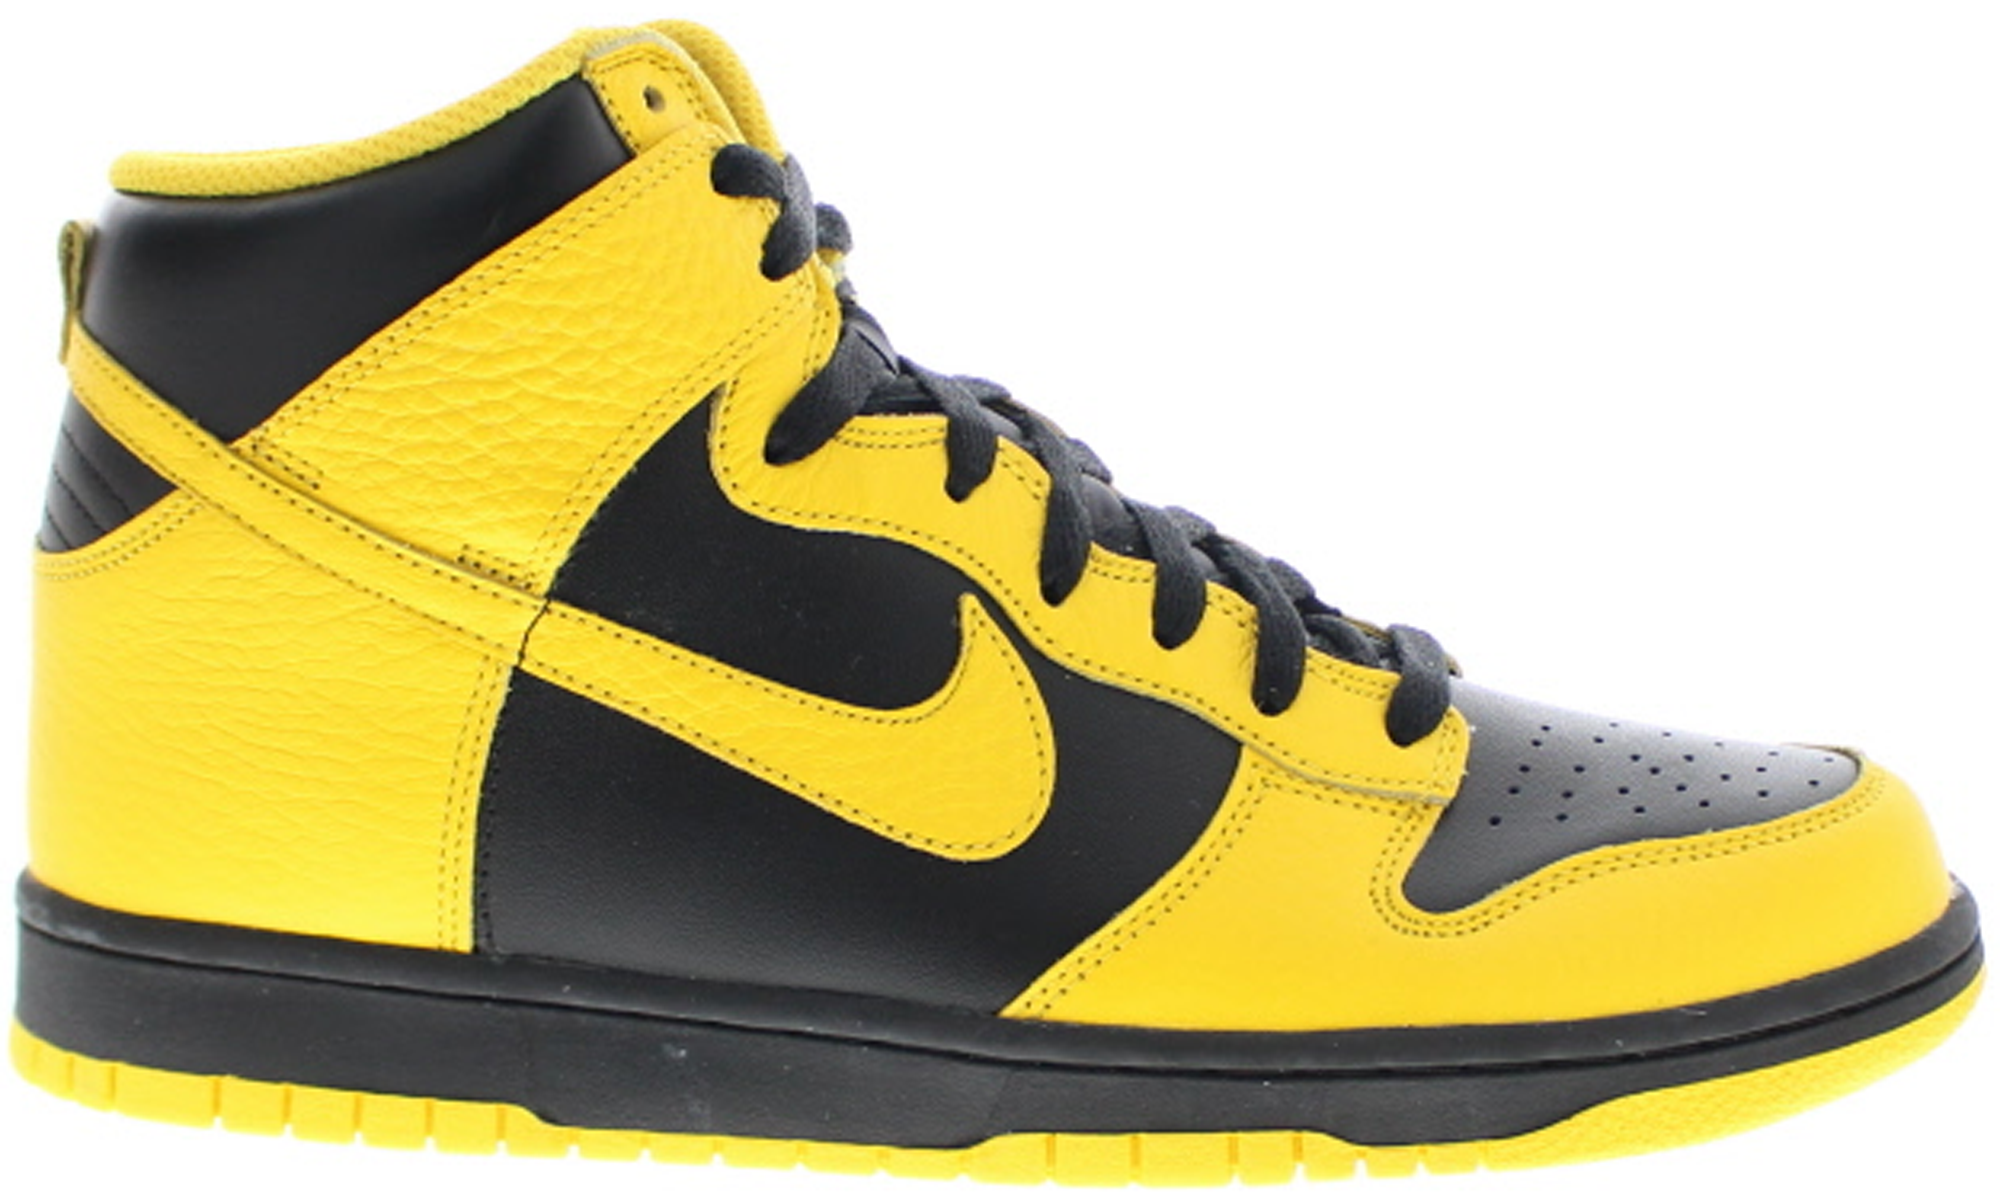 nike dunk high maize and blue stockx